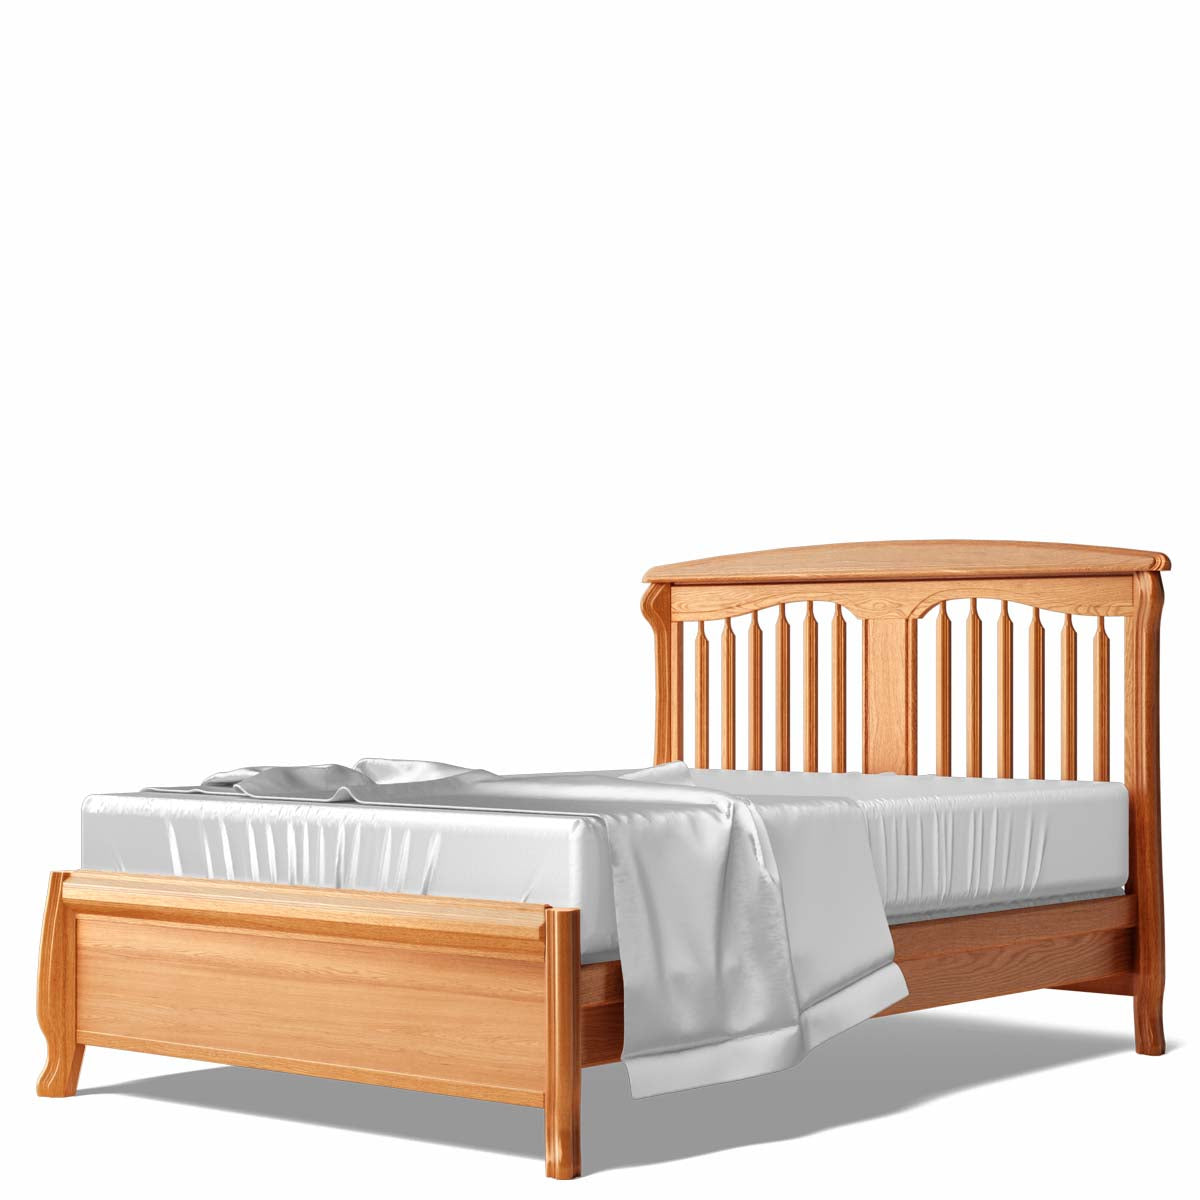 Romina Nerva Full Bed With Low Profile Footboard